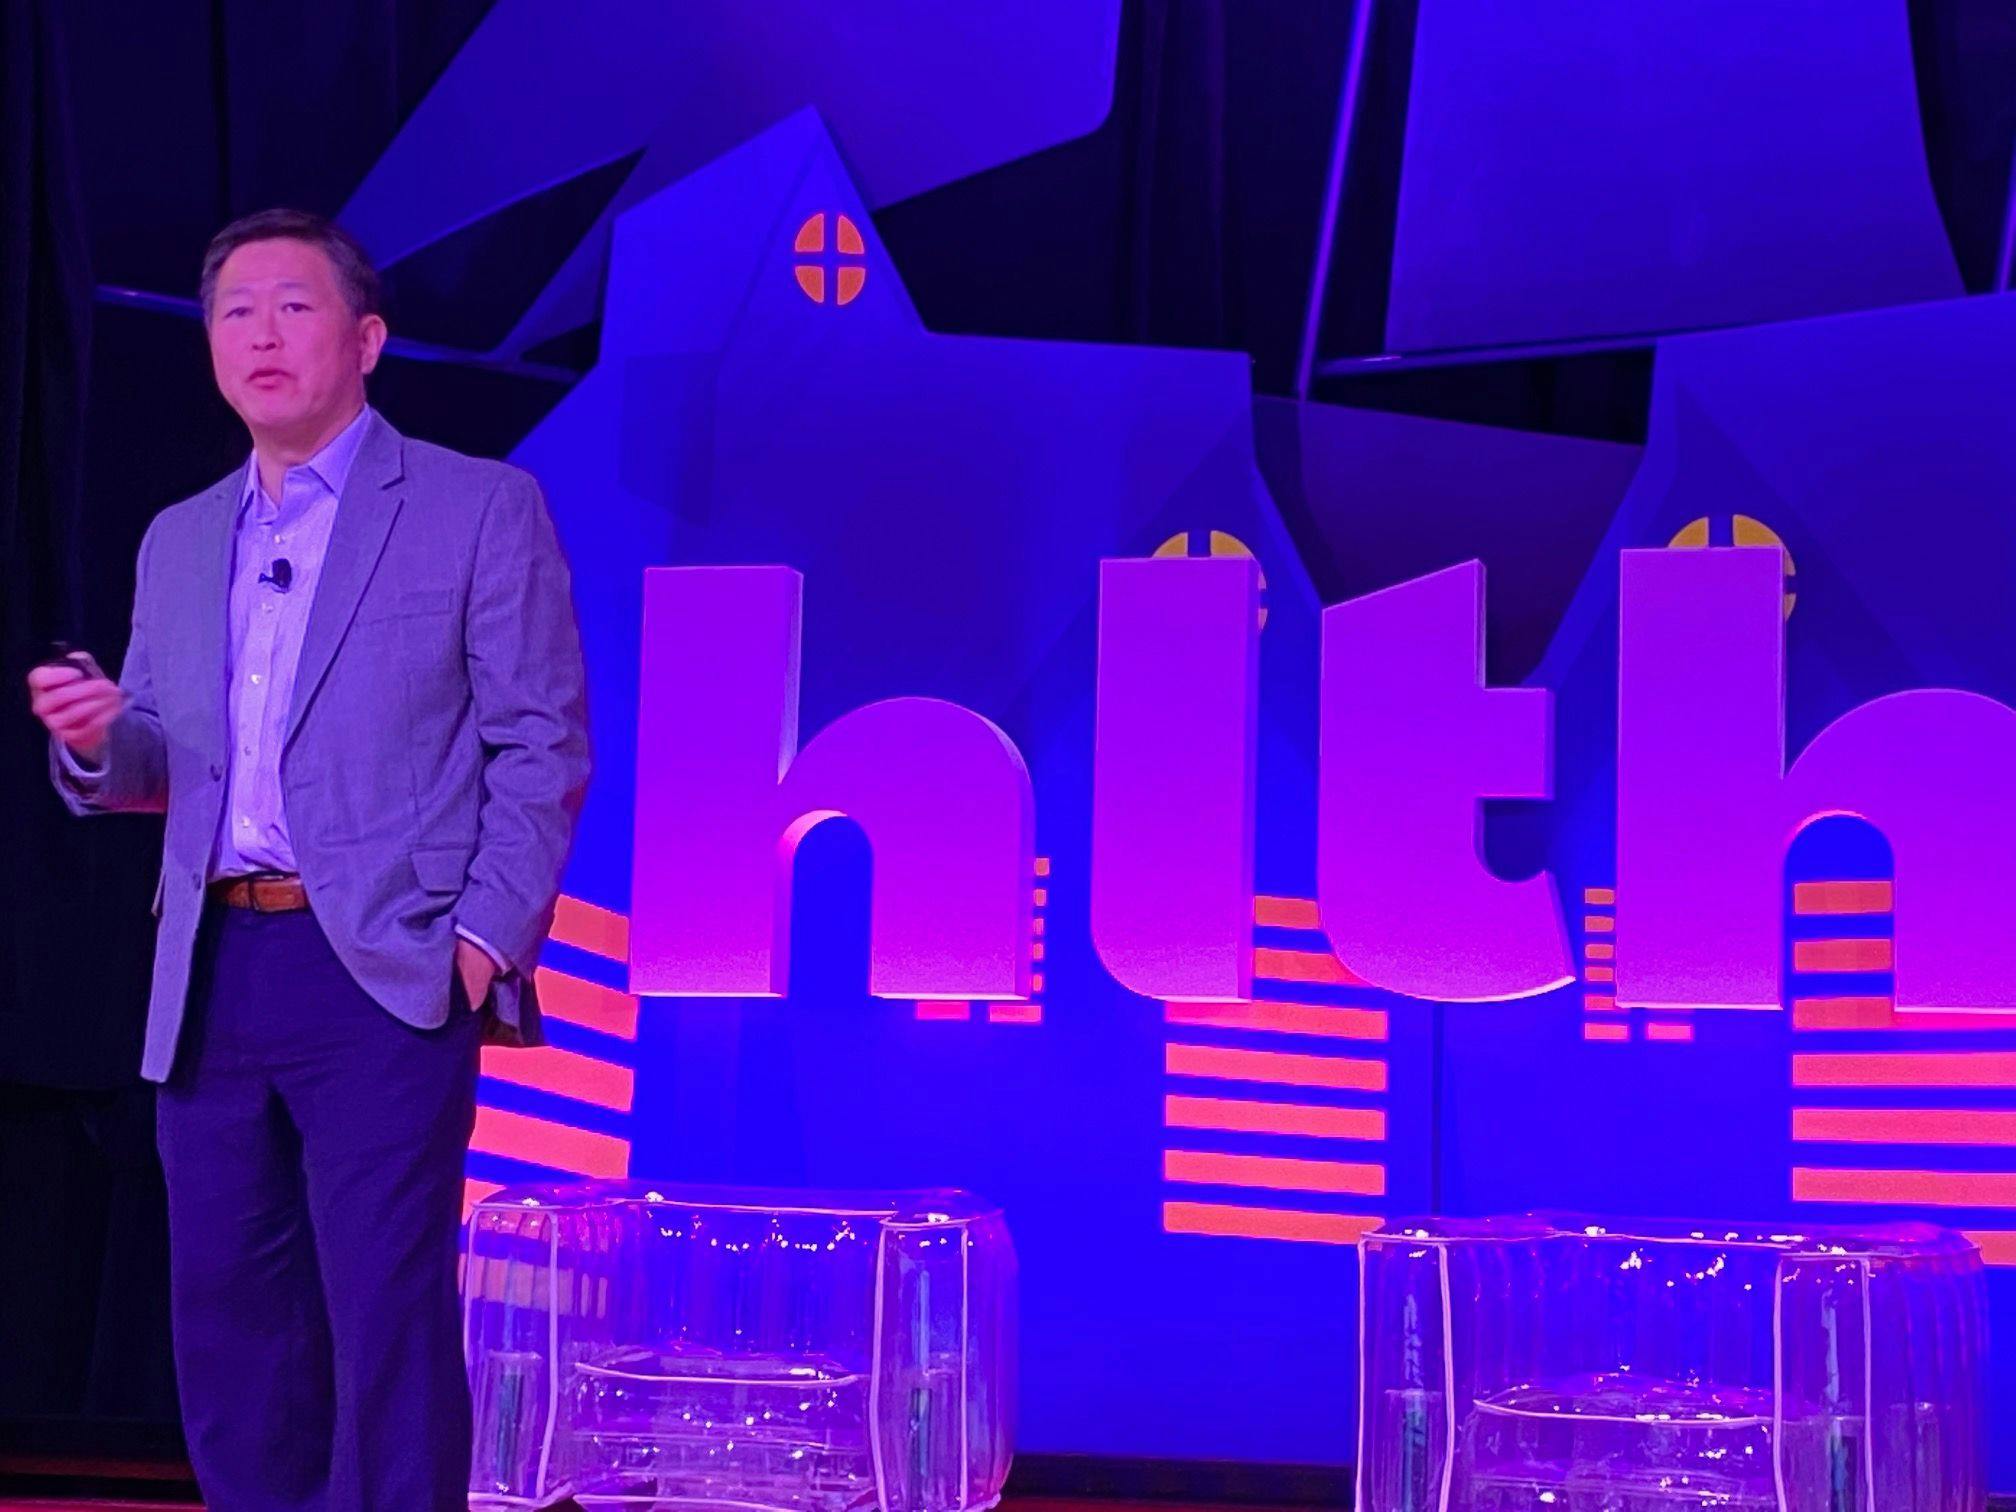 Geisinger CEO Jaewon Ryu makes case for value-based care | HLTH Conference